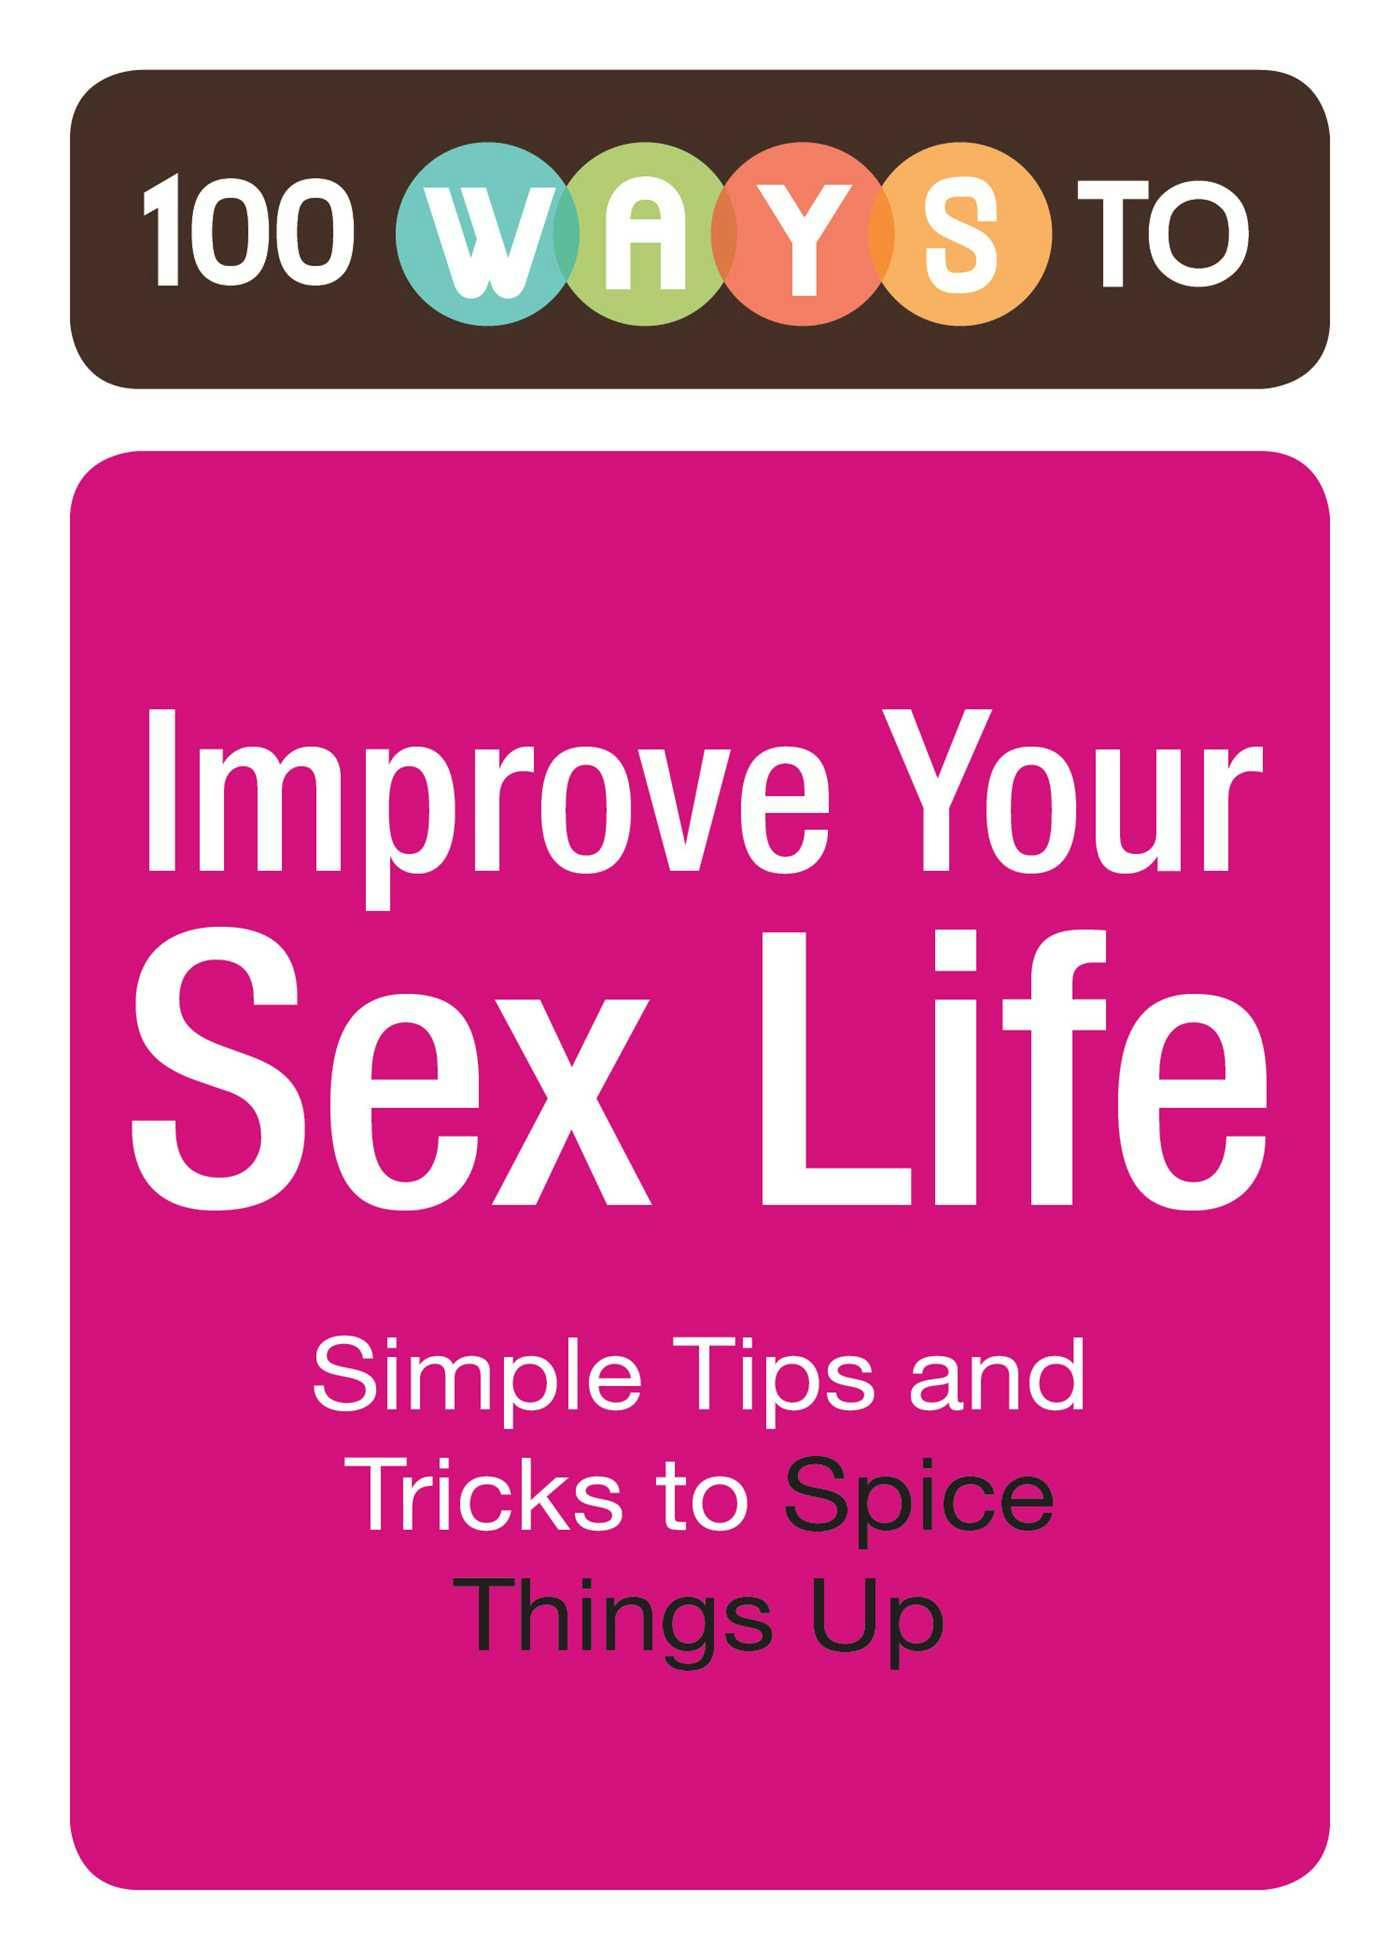 100 Ways to Improve Your Sex Life: Simple Tips and Tricks to Spice Things Up - 